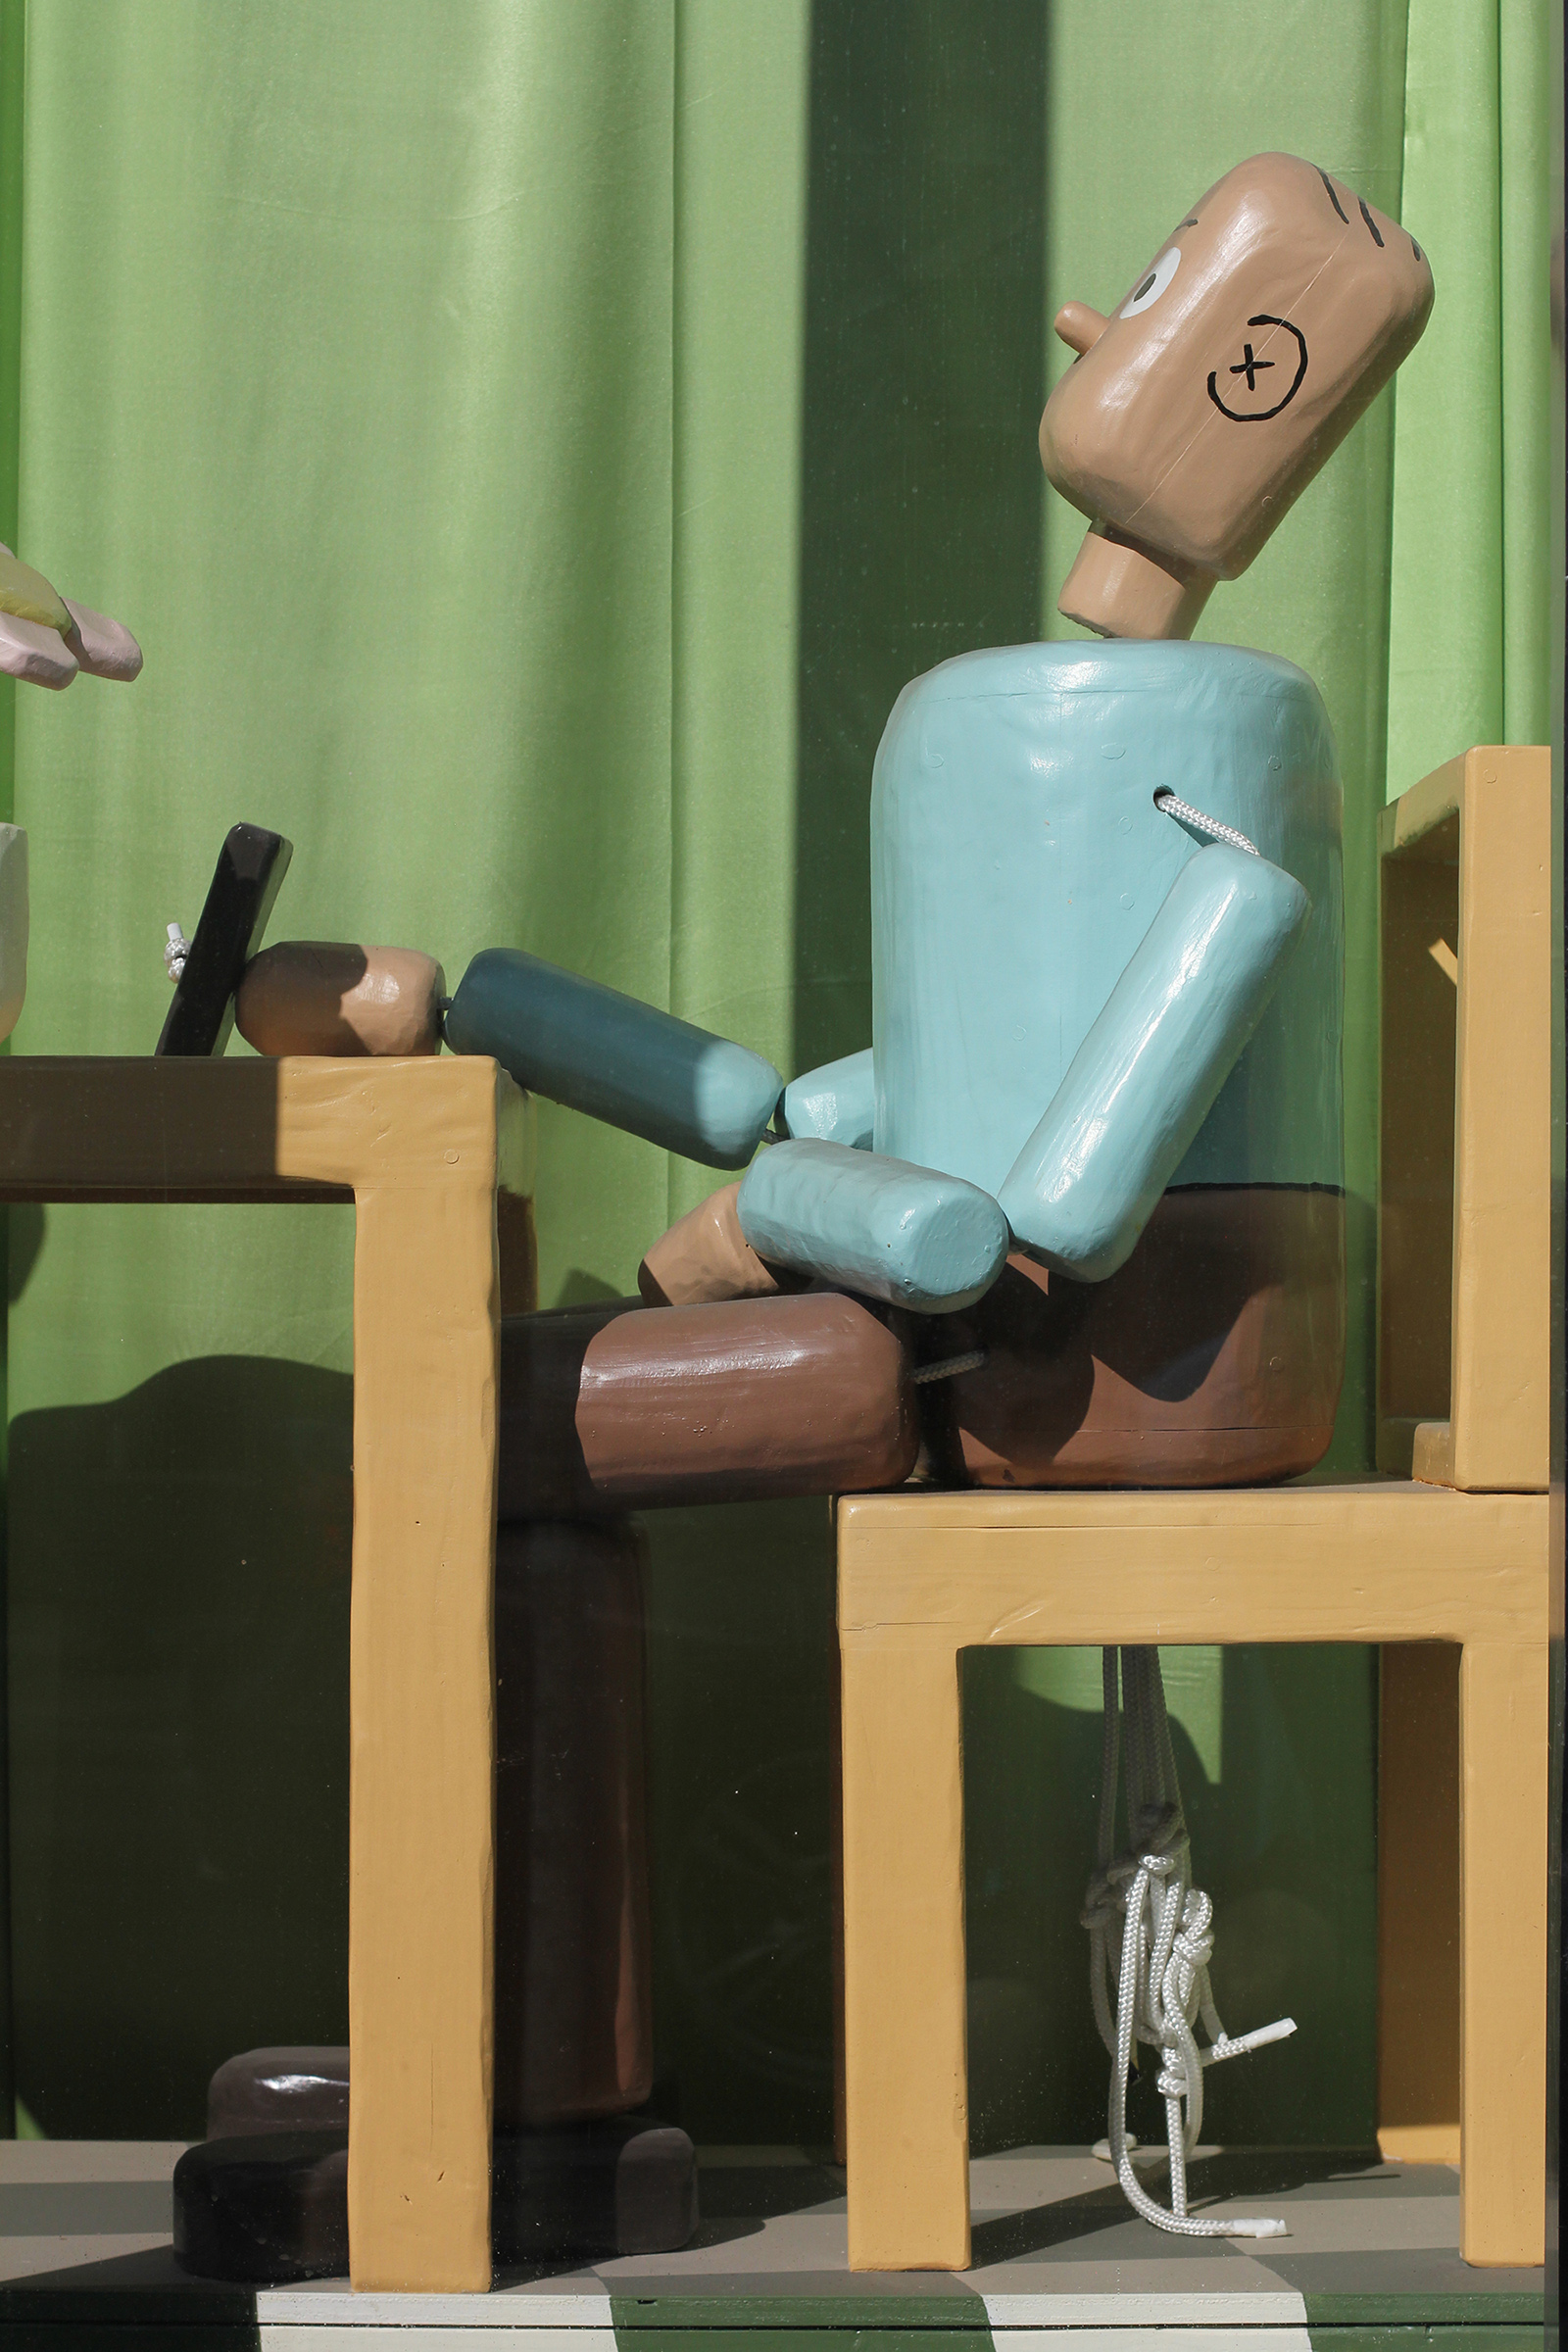 A closeup photograph of the wooden sculpture painted to look like a person sitting at a kitchen table. The figure, painted to have pink skin, resembles a push puppet toy.